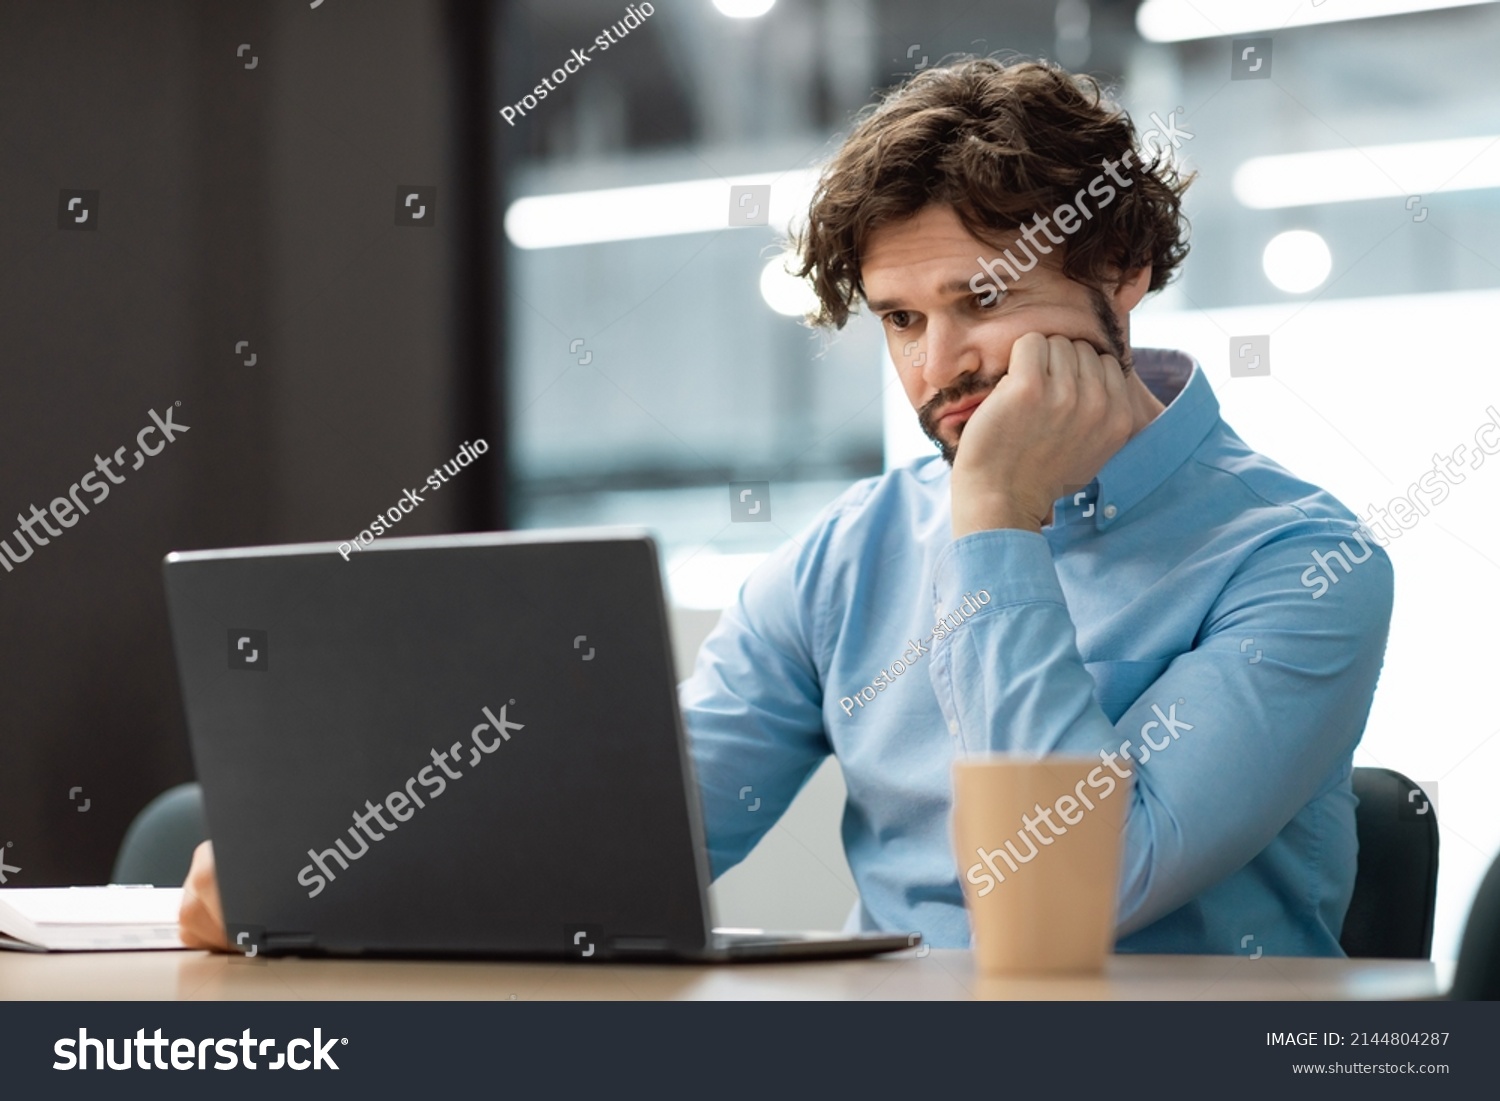 Portrait of sad bored business man sitting at desk using pc, leaning head on hand looking at screen. Upset stressed guy suffering job problems, reading bad negative news at office, free copy space #2144804287